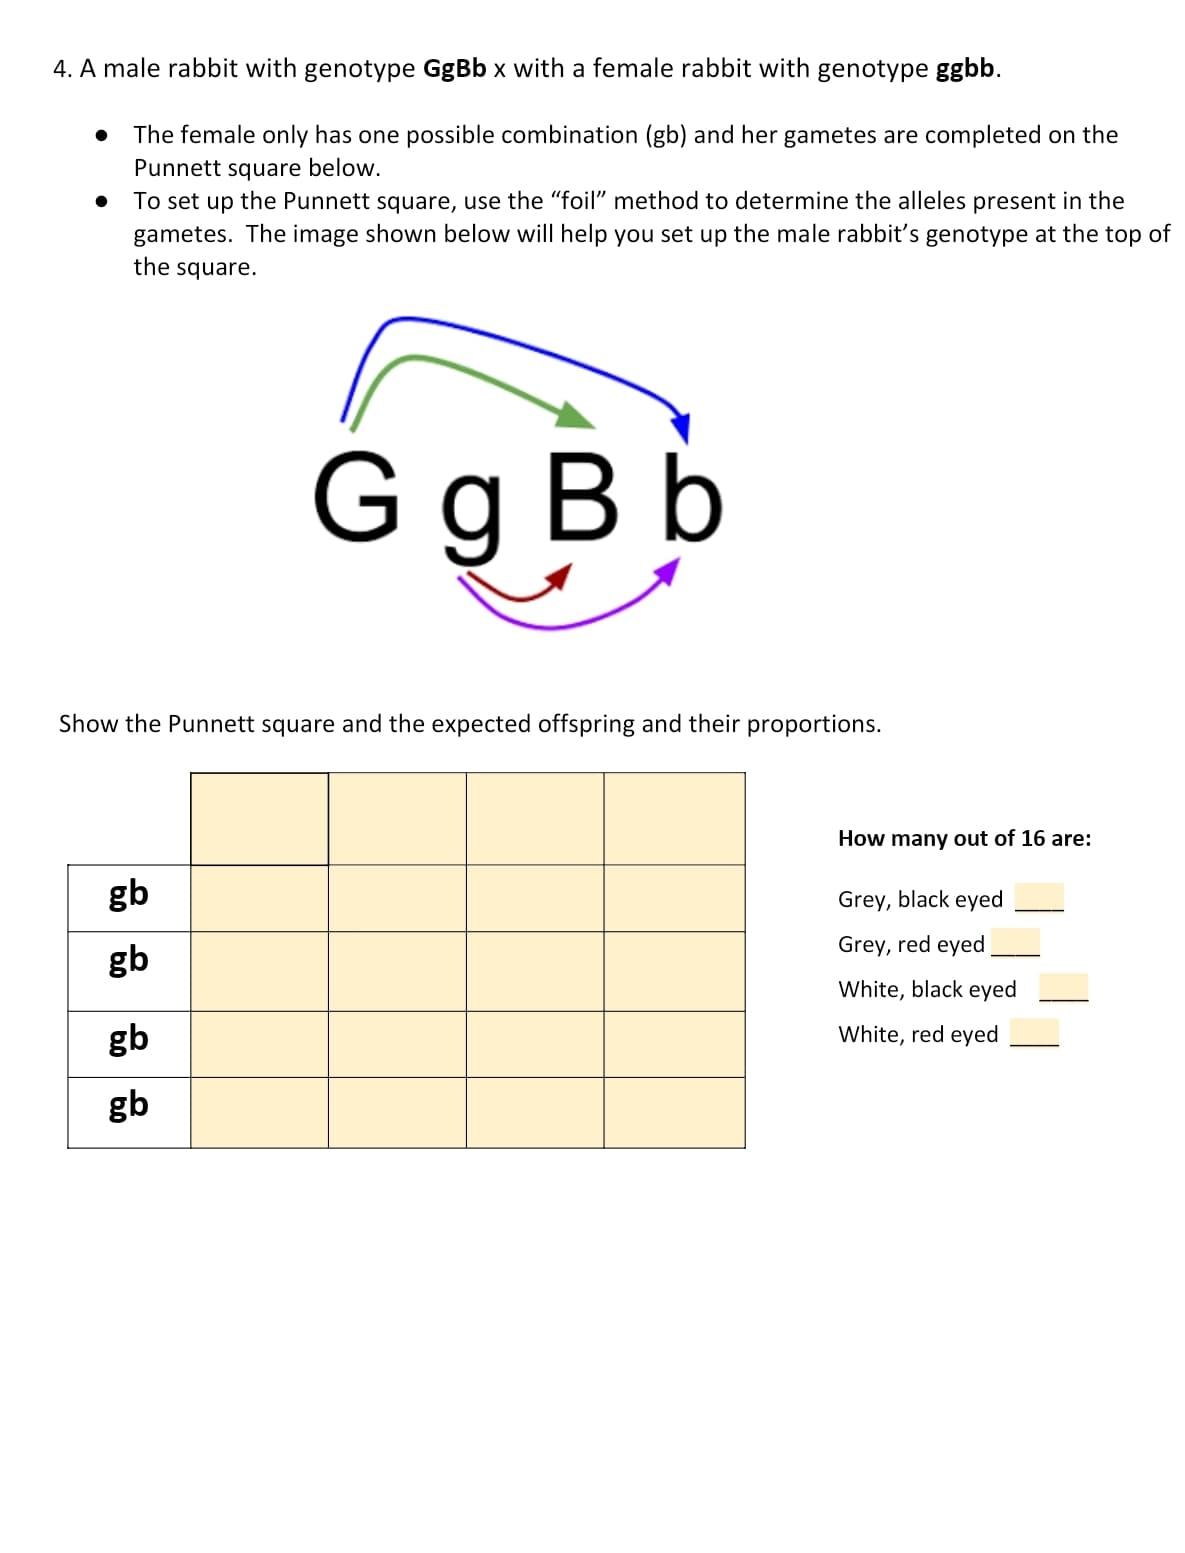 4. A male rabbit with genotype GgBb x with a female rabbit with genotype ggbb.
● The female only has one possible combination (gb) and her gametes are completed on the
Punnett square below.
To set up the Punnett square, use the "foil" method to determine the alleles present in the
gametes. The image shown below will help you set up the male rabbit's genotype at the top of
the square.
●
Show the Punnett square and the expected offspring and their proportions.
gb
gb
G g Bb
gb
gb
How many out of 16 are:
Grey, black eyed
Grey, red eyed
White, black eyed
White, red eyed